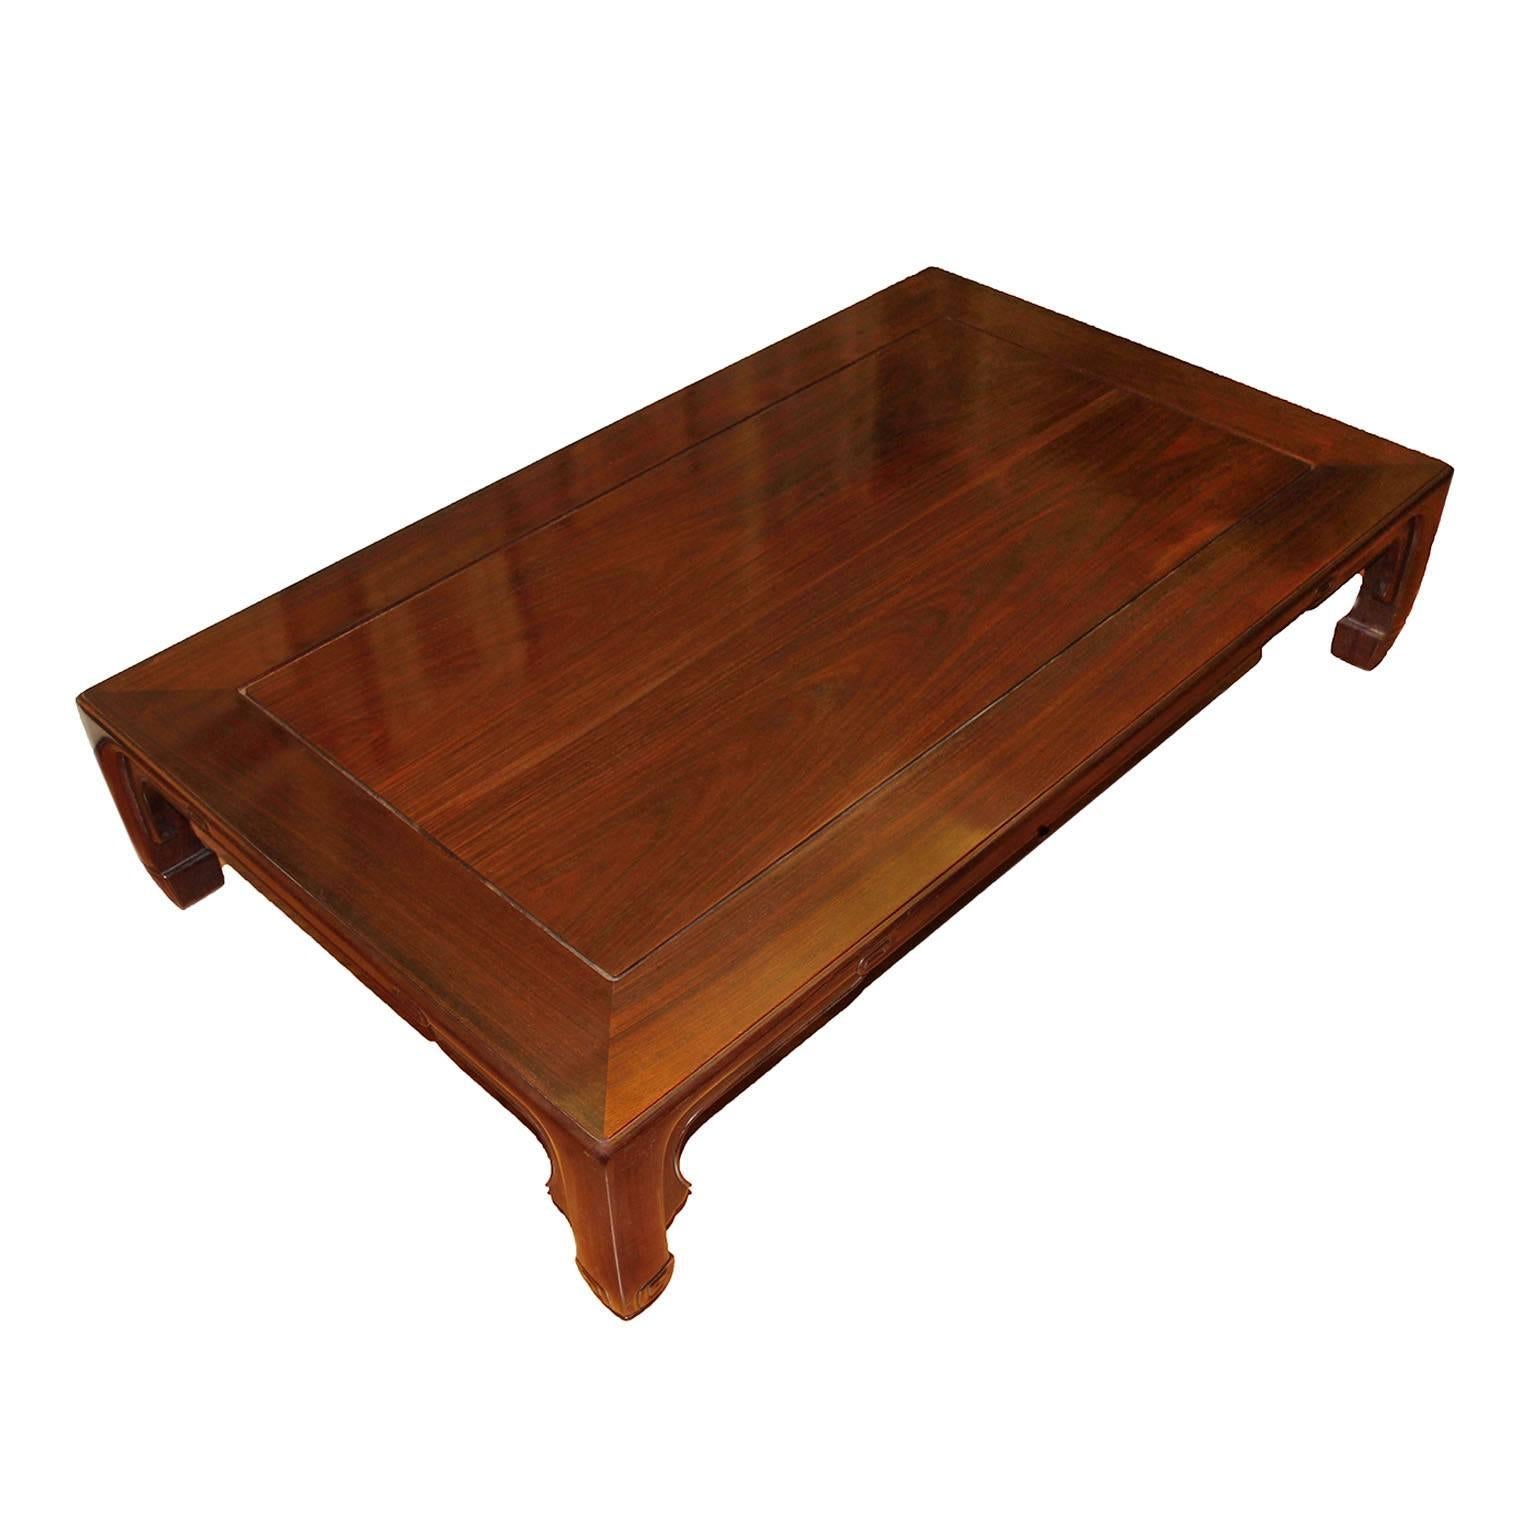 Early 20th Century Japanese Low Rectangular Coffee Table